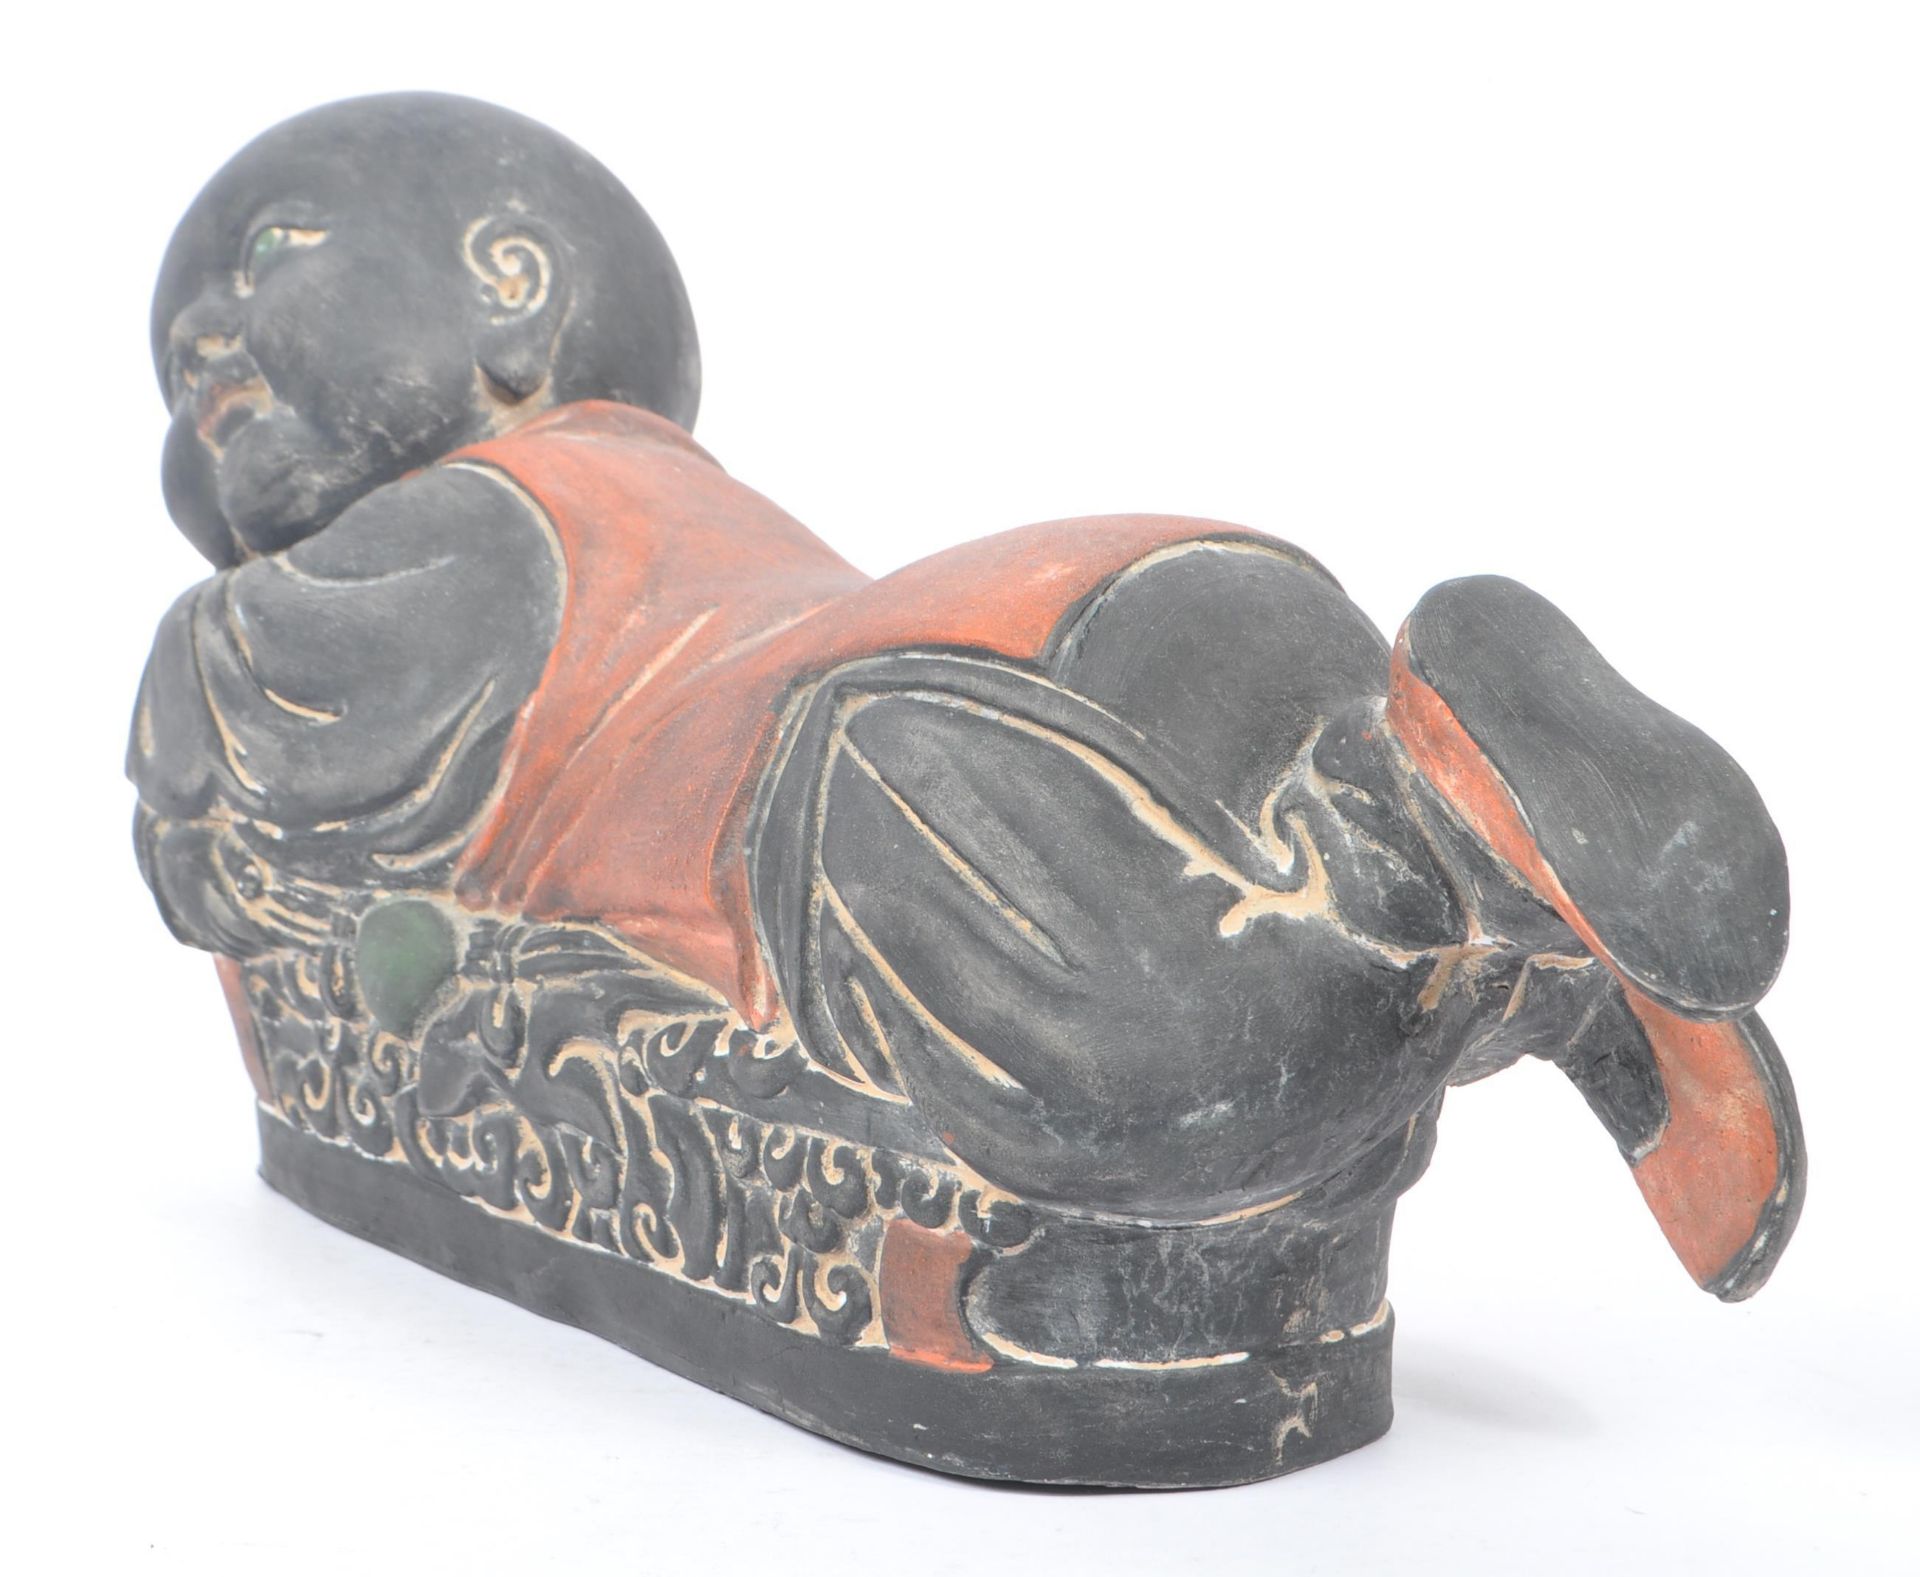 EARLY 20TH CENTURY CHINESE CERAMIC PILLOW FIGURE - Image 4 of 6